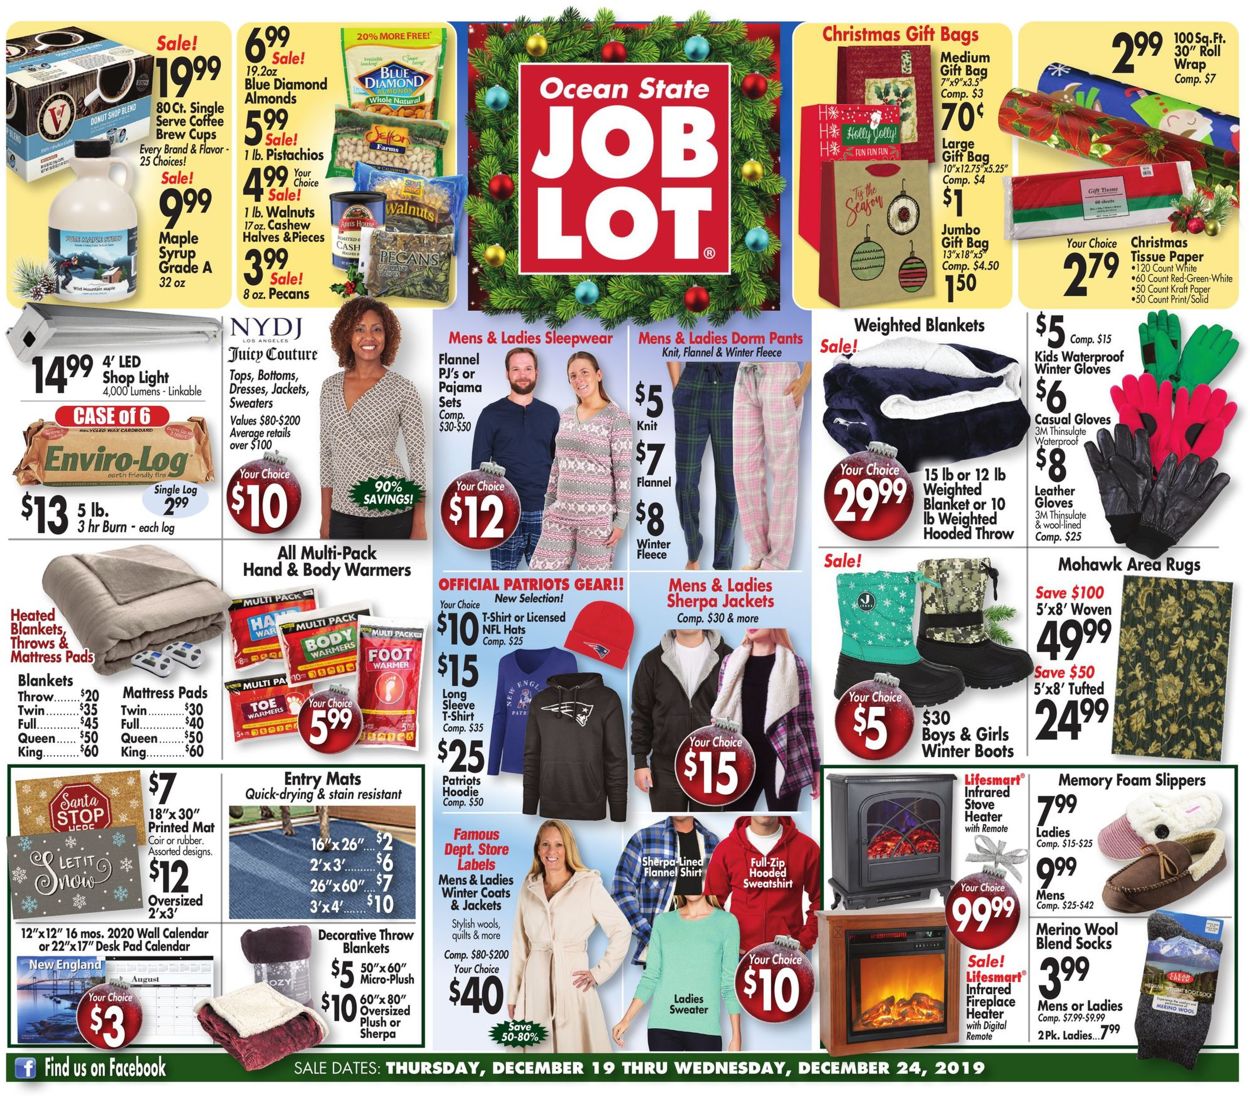 Ocean State Job Lot Christmas Ad 2019 Current weekly ad